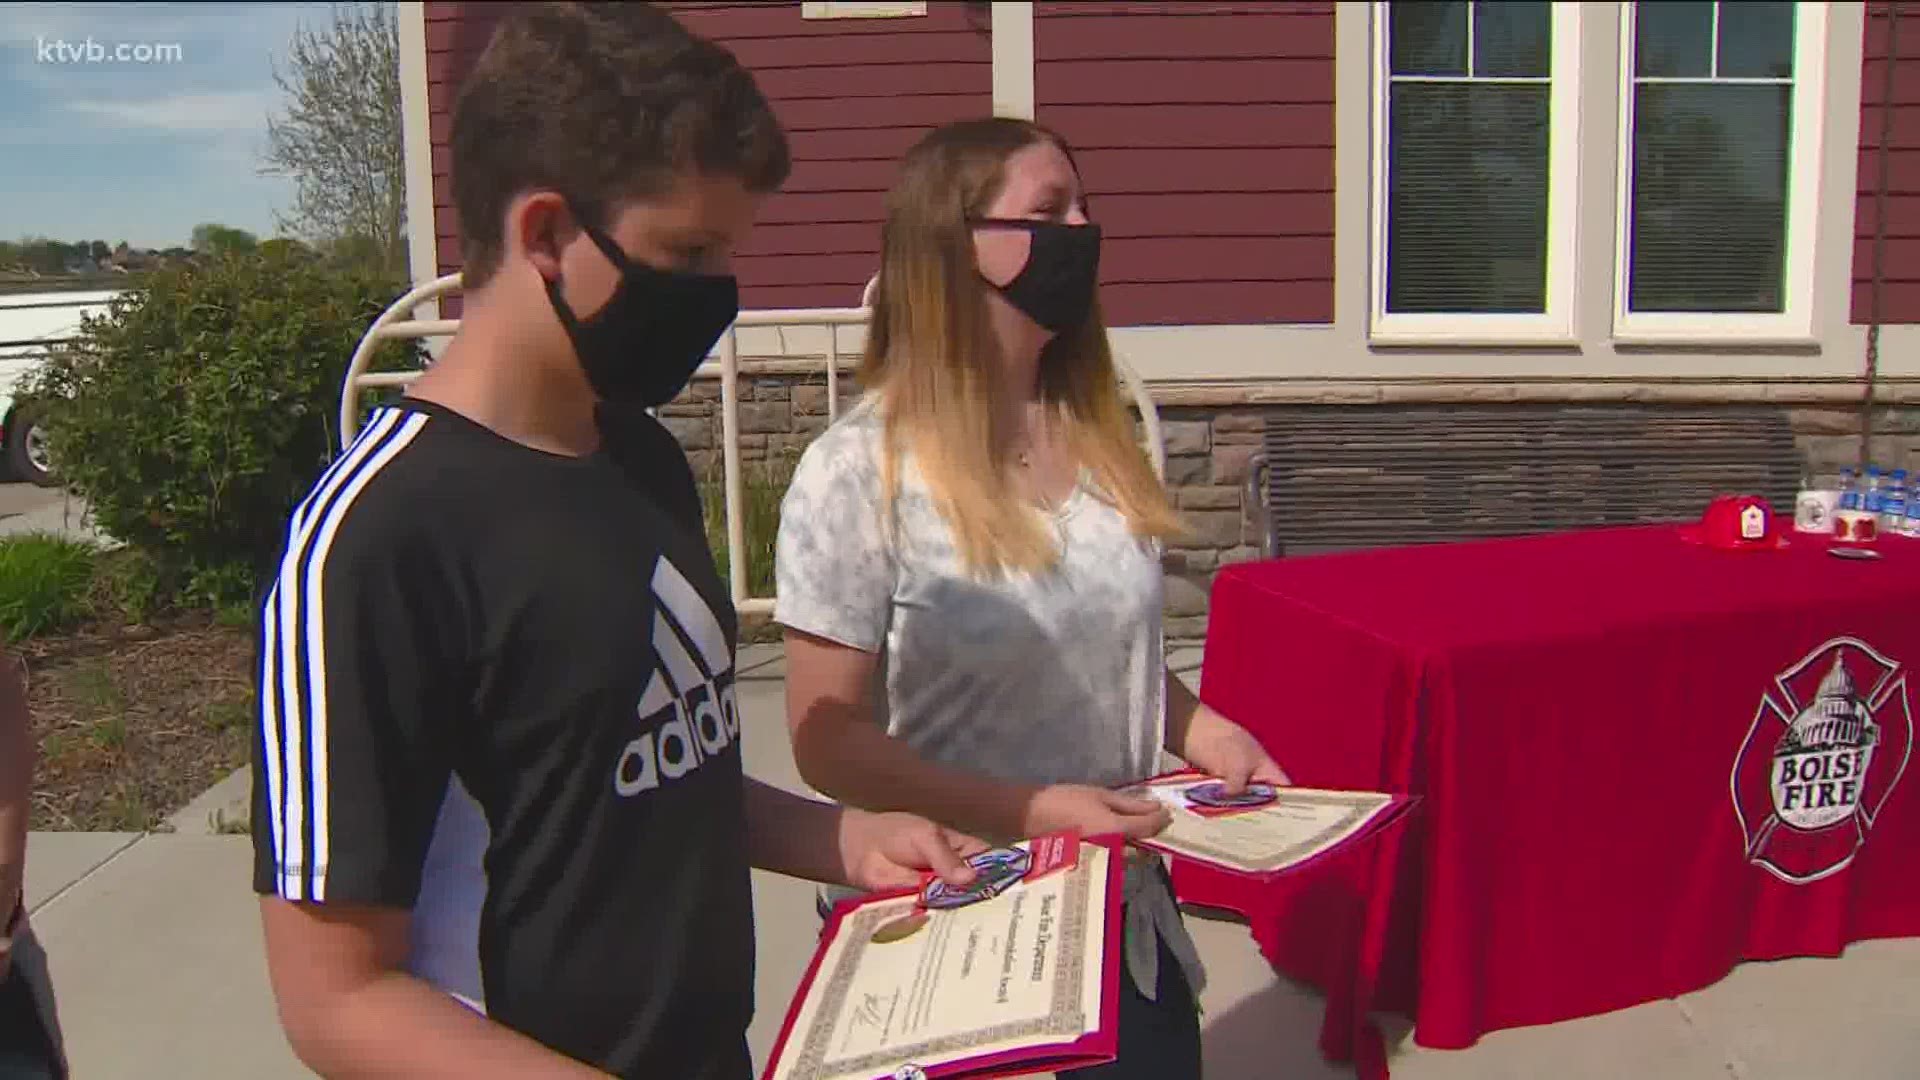 The Boise Fire Department presented awards to 13-year-old Caleb Joramo and his sister, 16-year-old Ashley Joramo during a ceremony Friday.